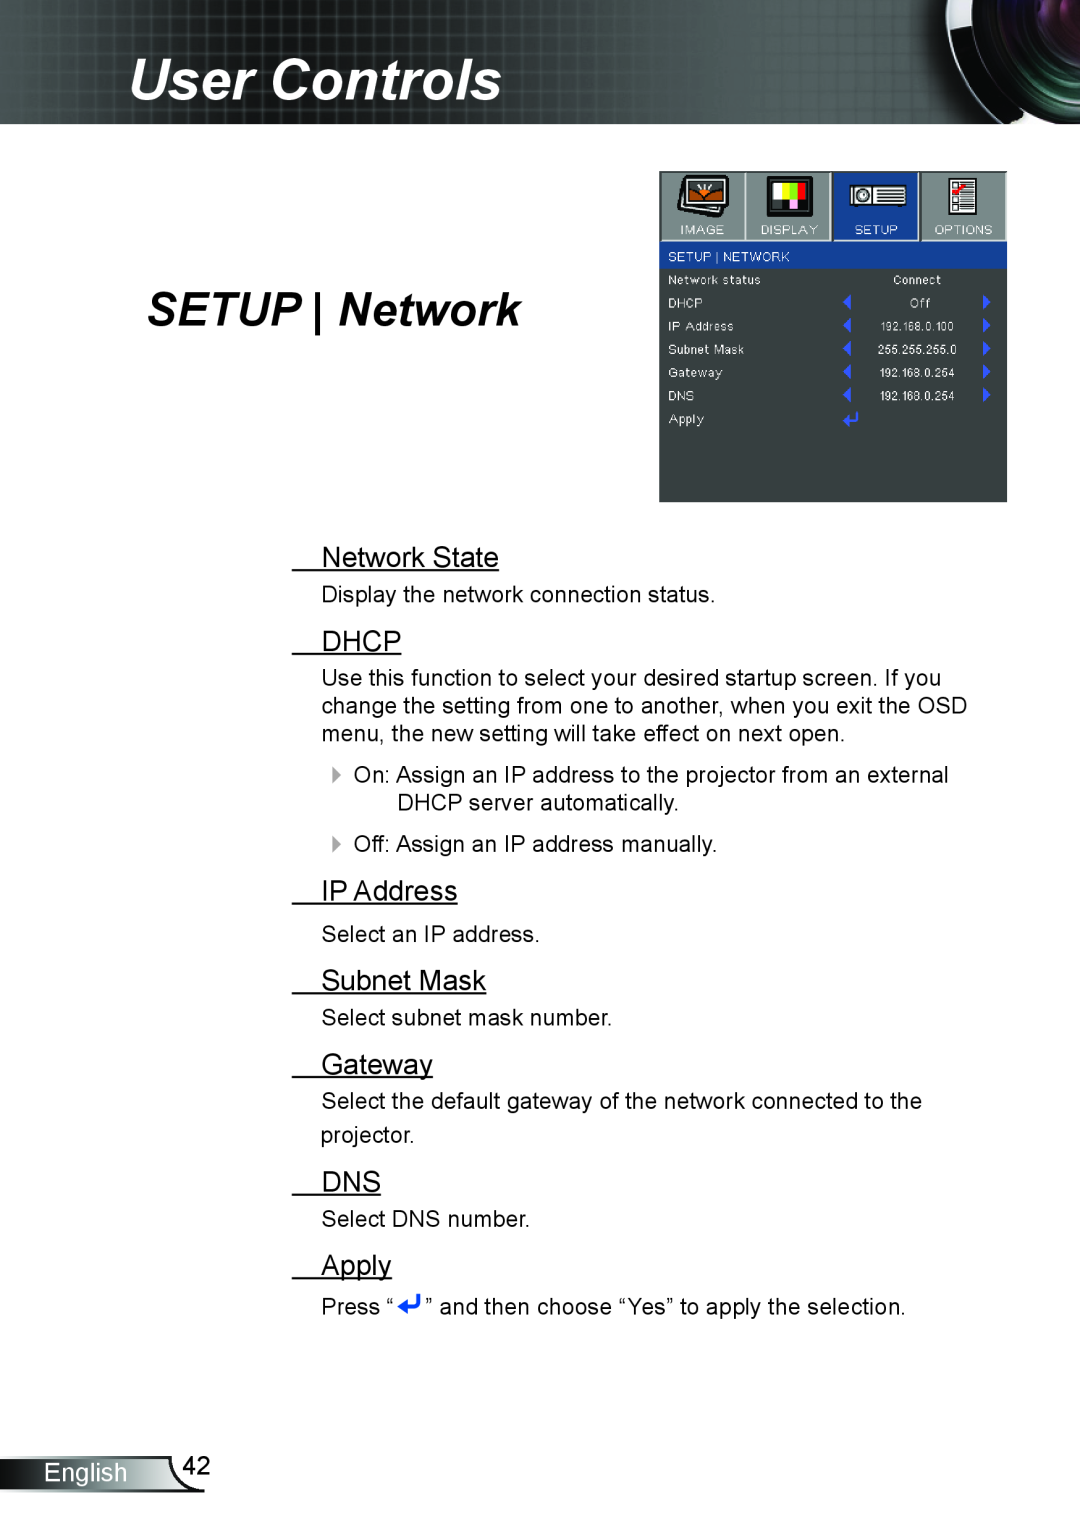 Optoma Technology TW615GOV SETUP Network, Network State, Dhcp, IP Address, Subnet Mask, Gateway, Apply, User Controls 